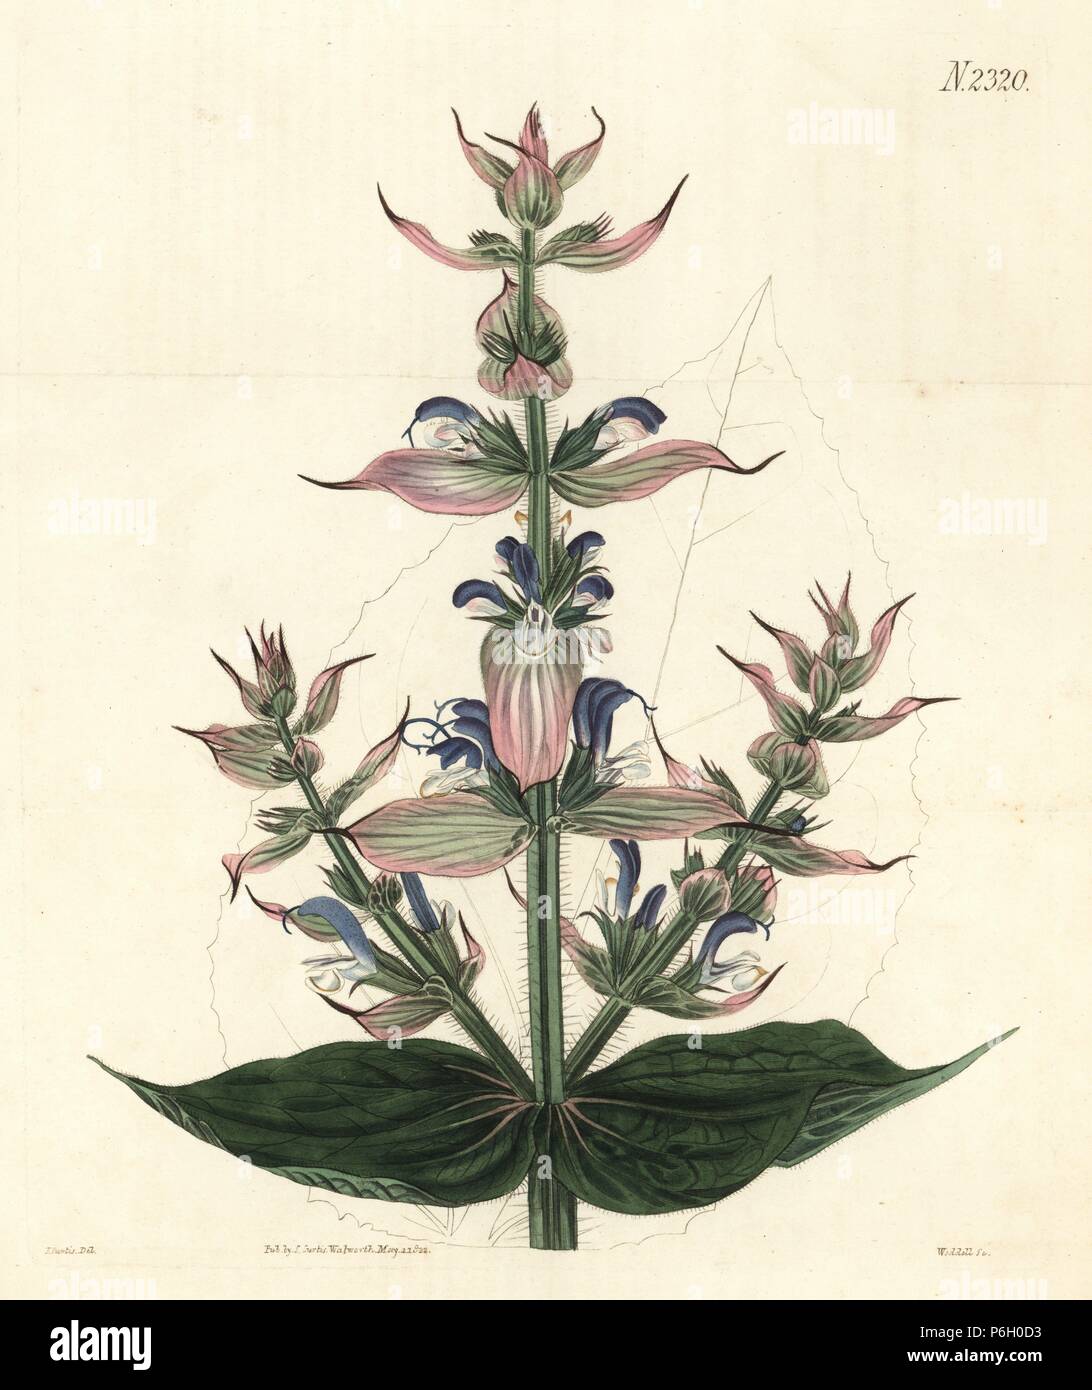 Long-bracted sage or clary, Salvia bracteata. Handcoloured copperplate engraving by Weddell after an illustration by John Curtis from Samuel Curtis's 'Botanical Magazine,' London, 1822. Stock Photo